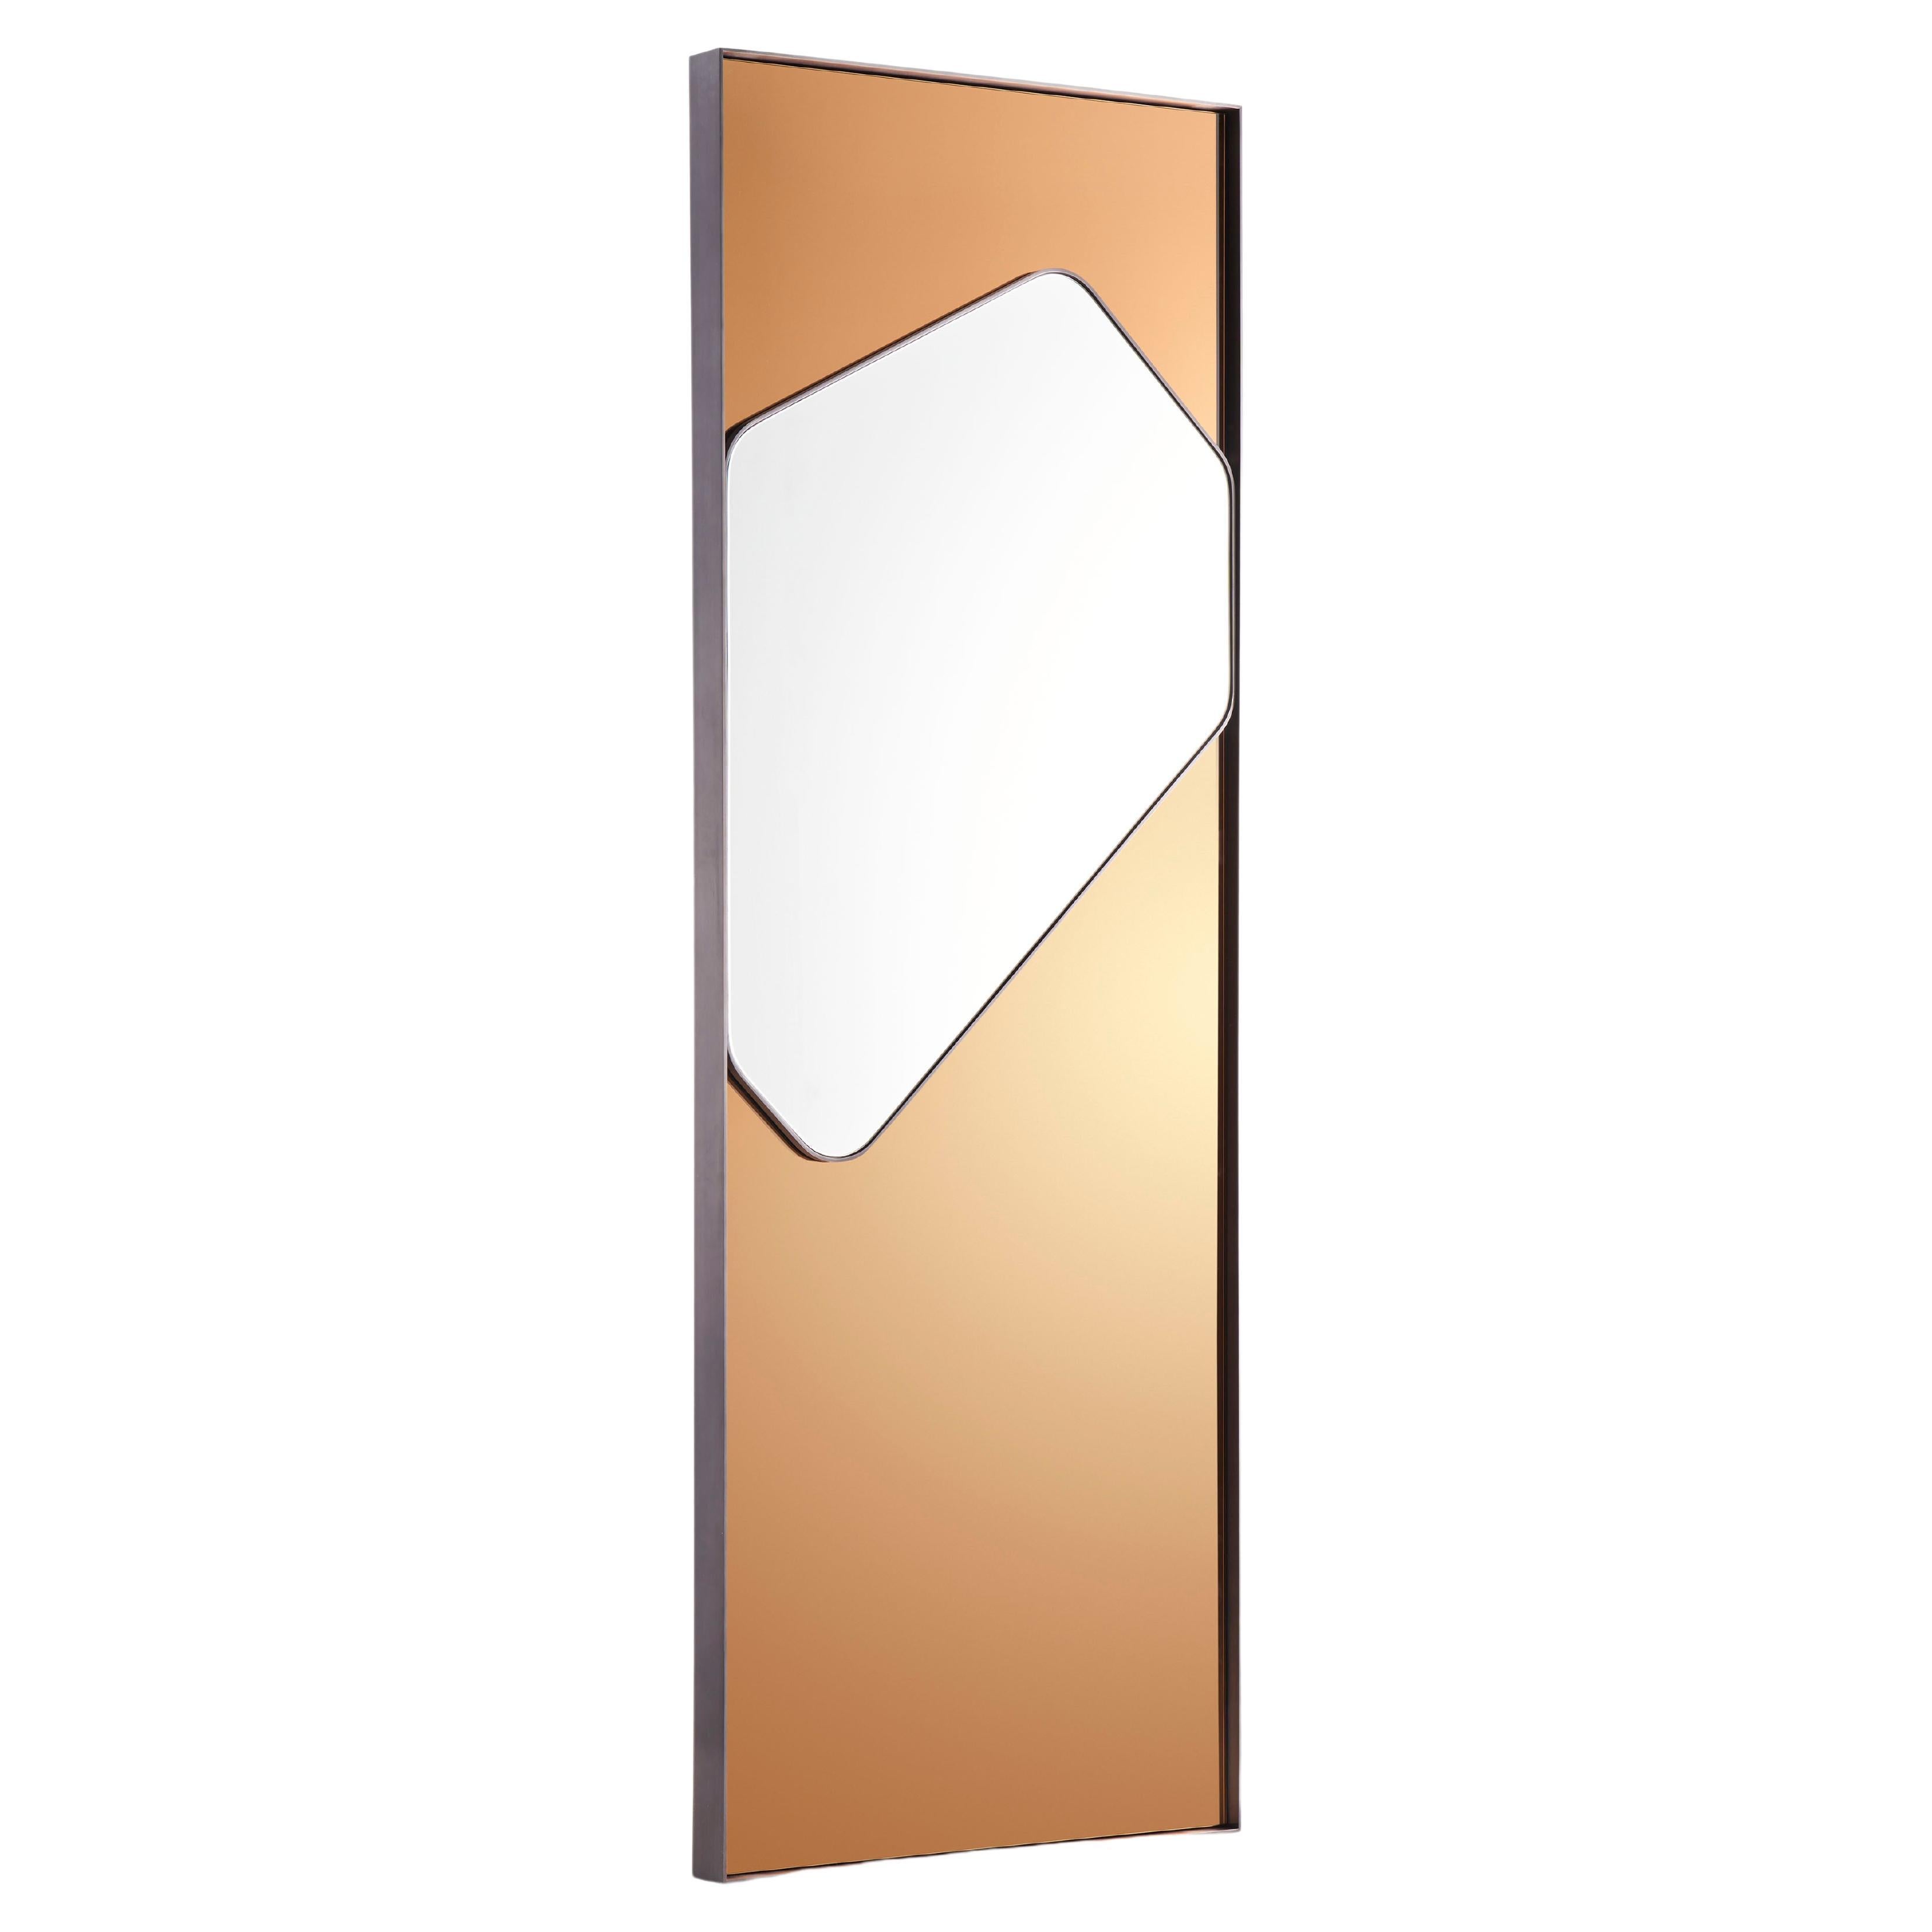 Ovo Trapezoid Mirror, Clear Mirror Set Onto a Colored Mirror Background